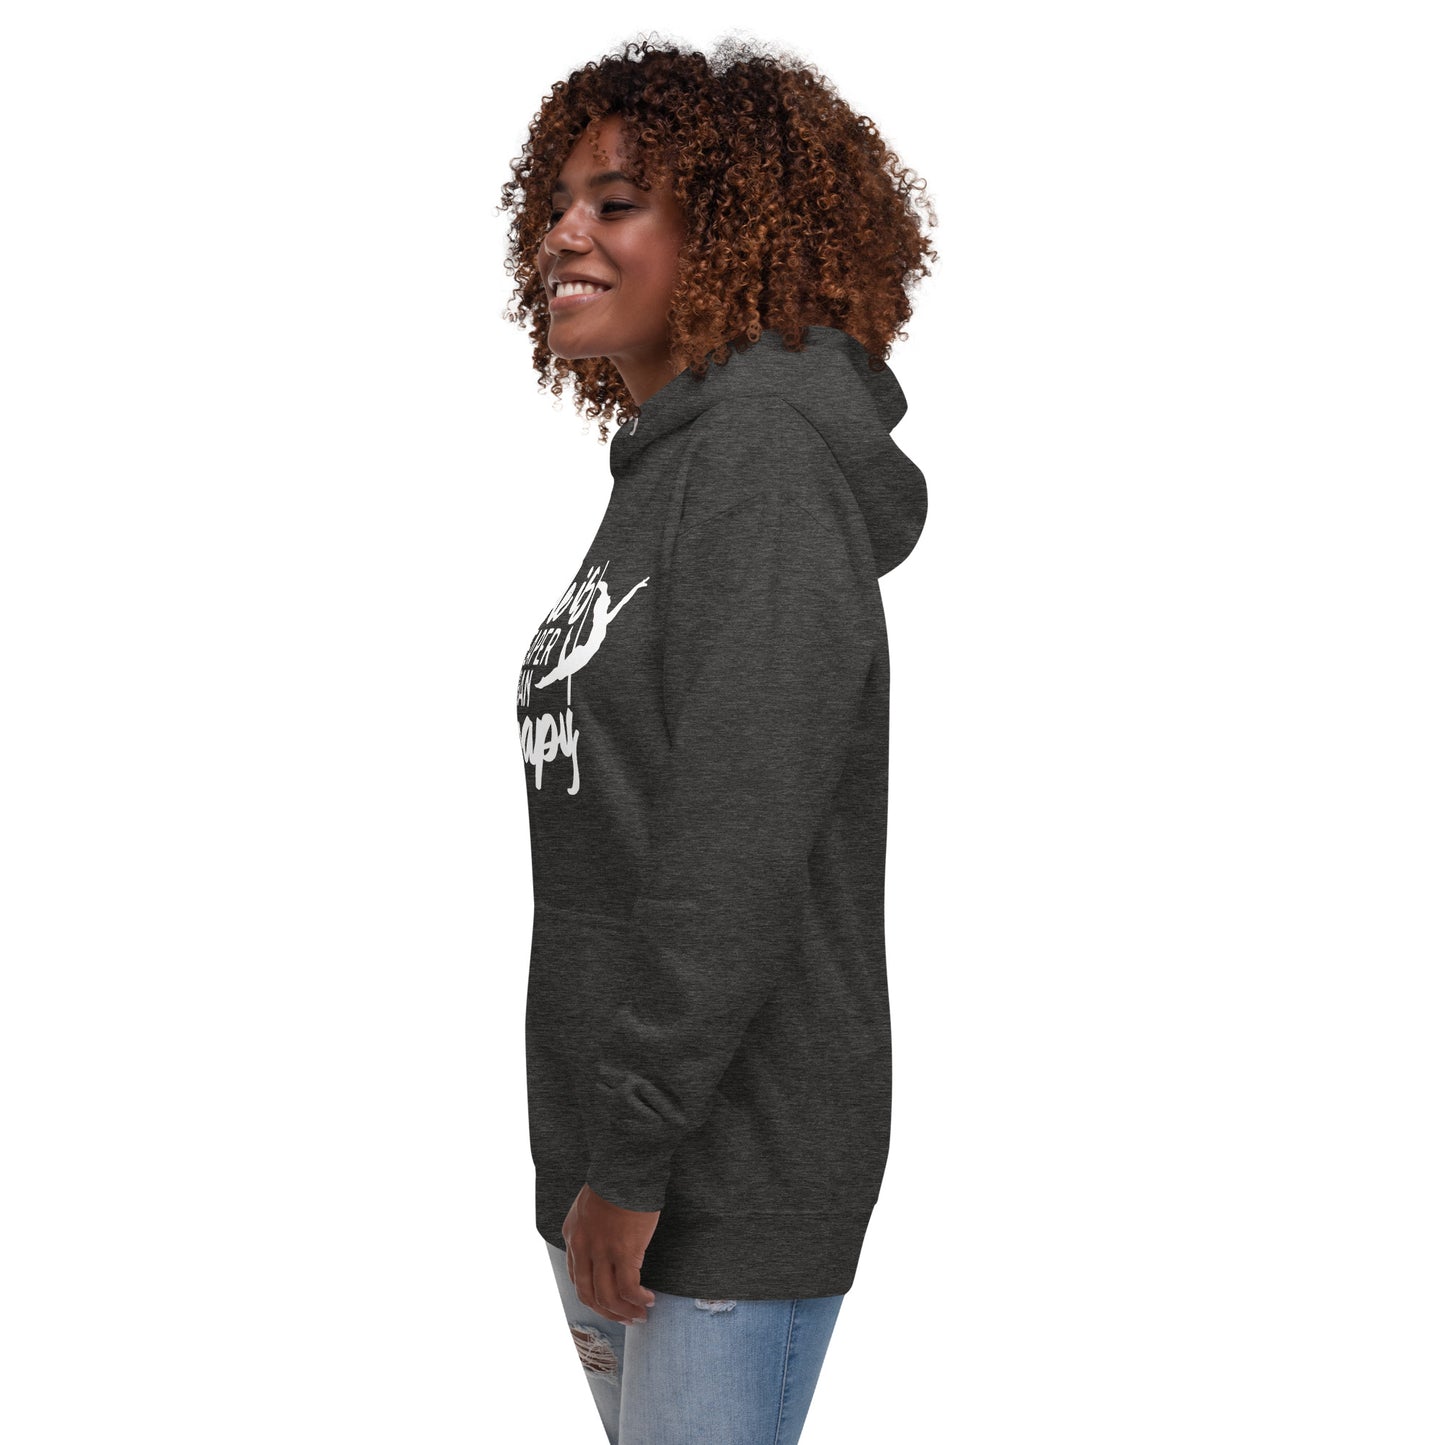 Pole Is Cheaper Than Therapy - Unisex Hoodie